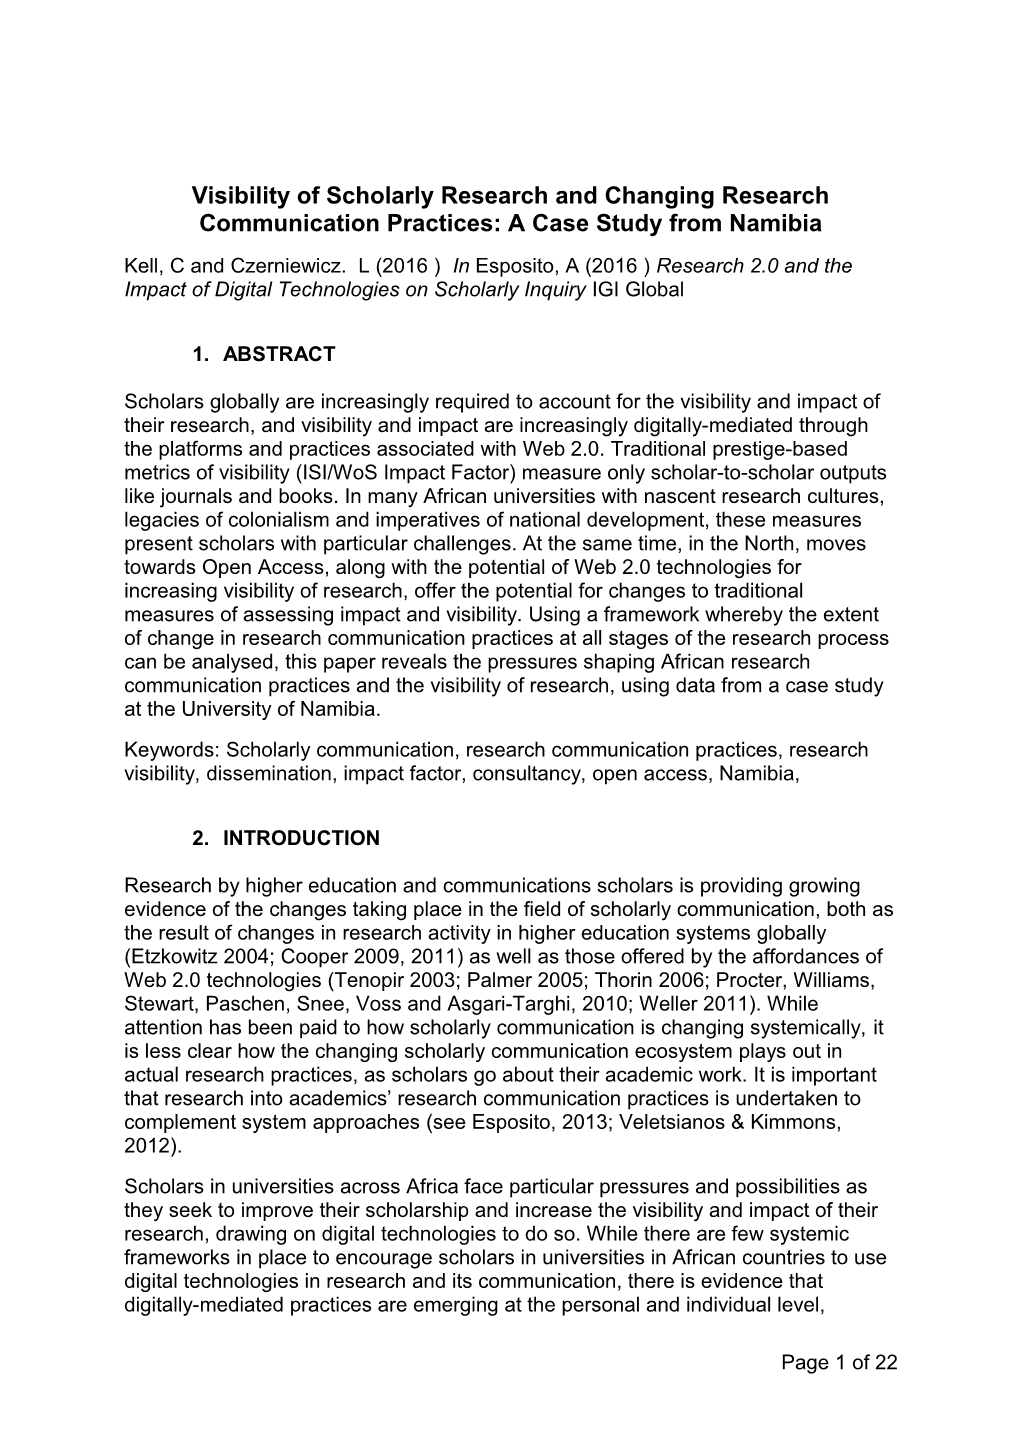 Visibility of Scholarly Research and Changing Research Communication Practices:A Case